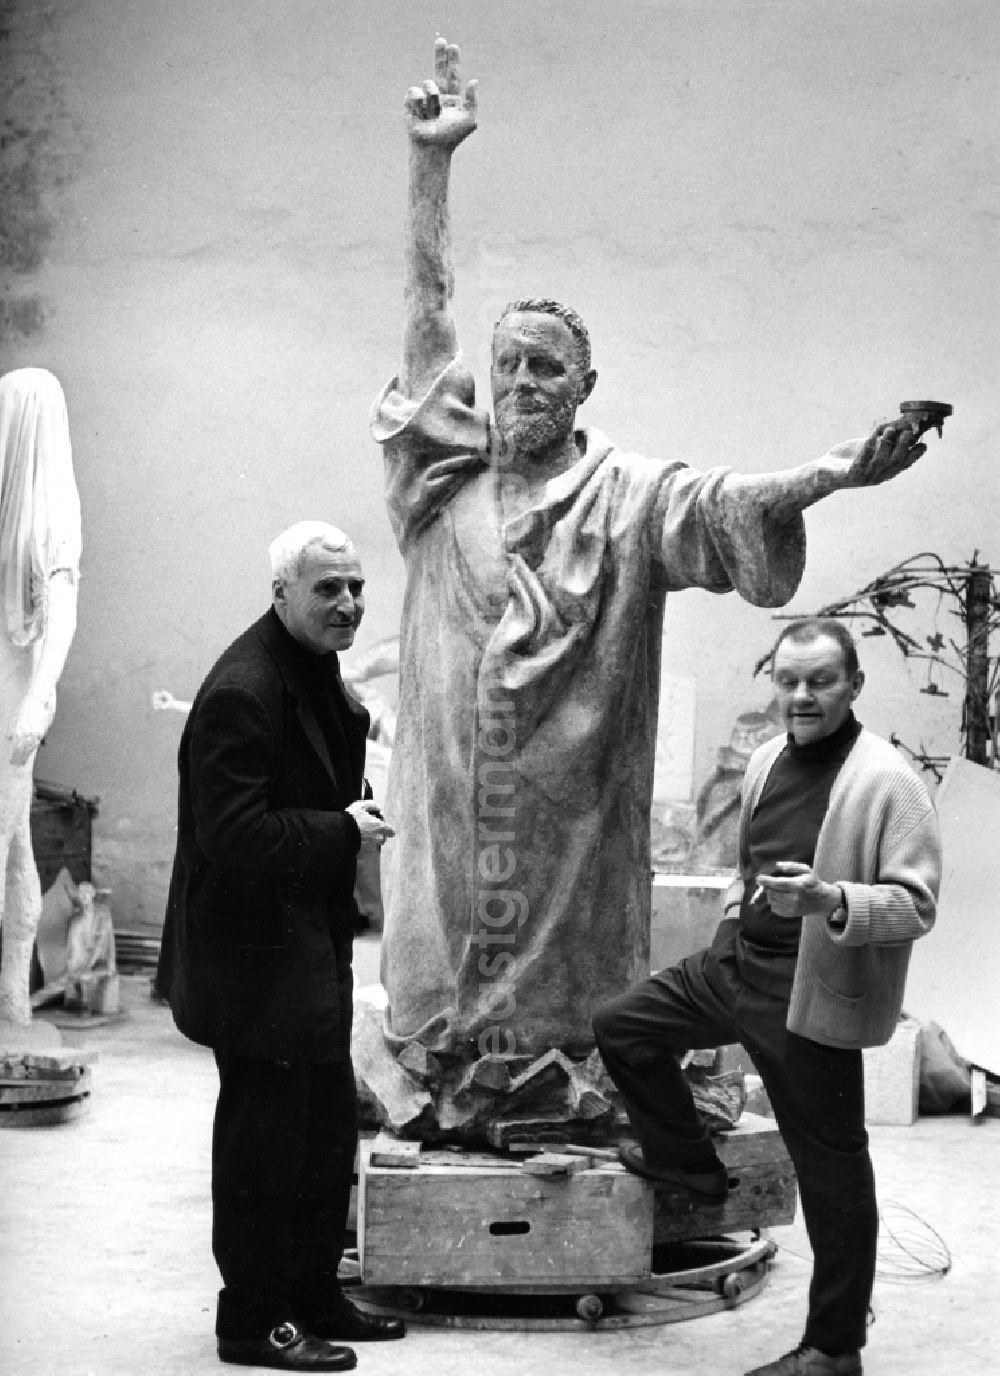 GDR picture archive: Berlin - Writer Konstantin Michailowitsch Simonow visits the sculptor Fritz Cremer while working on his free sculpture and round sculpture And it moves! (Galileo II) in his studio on Pariser Platz in the Mitte district in Berlin, the former capital of the GDR, German Democratic Republic